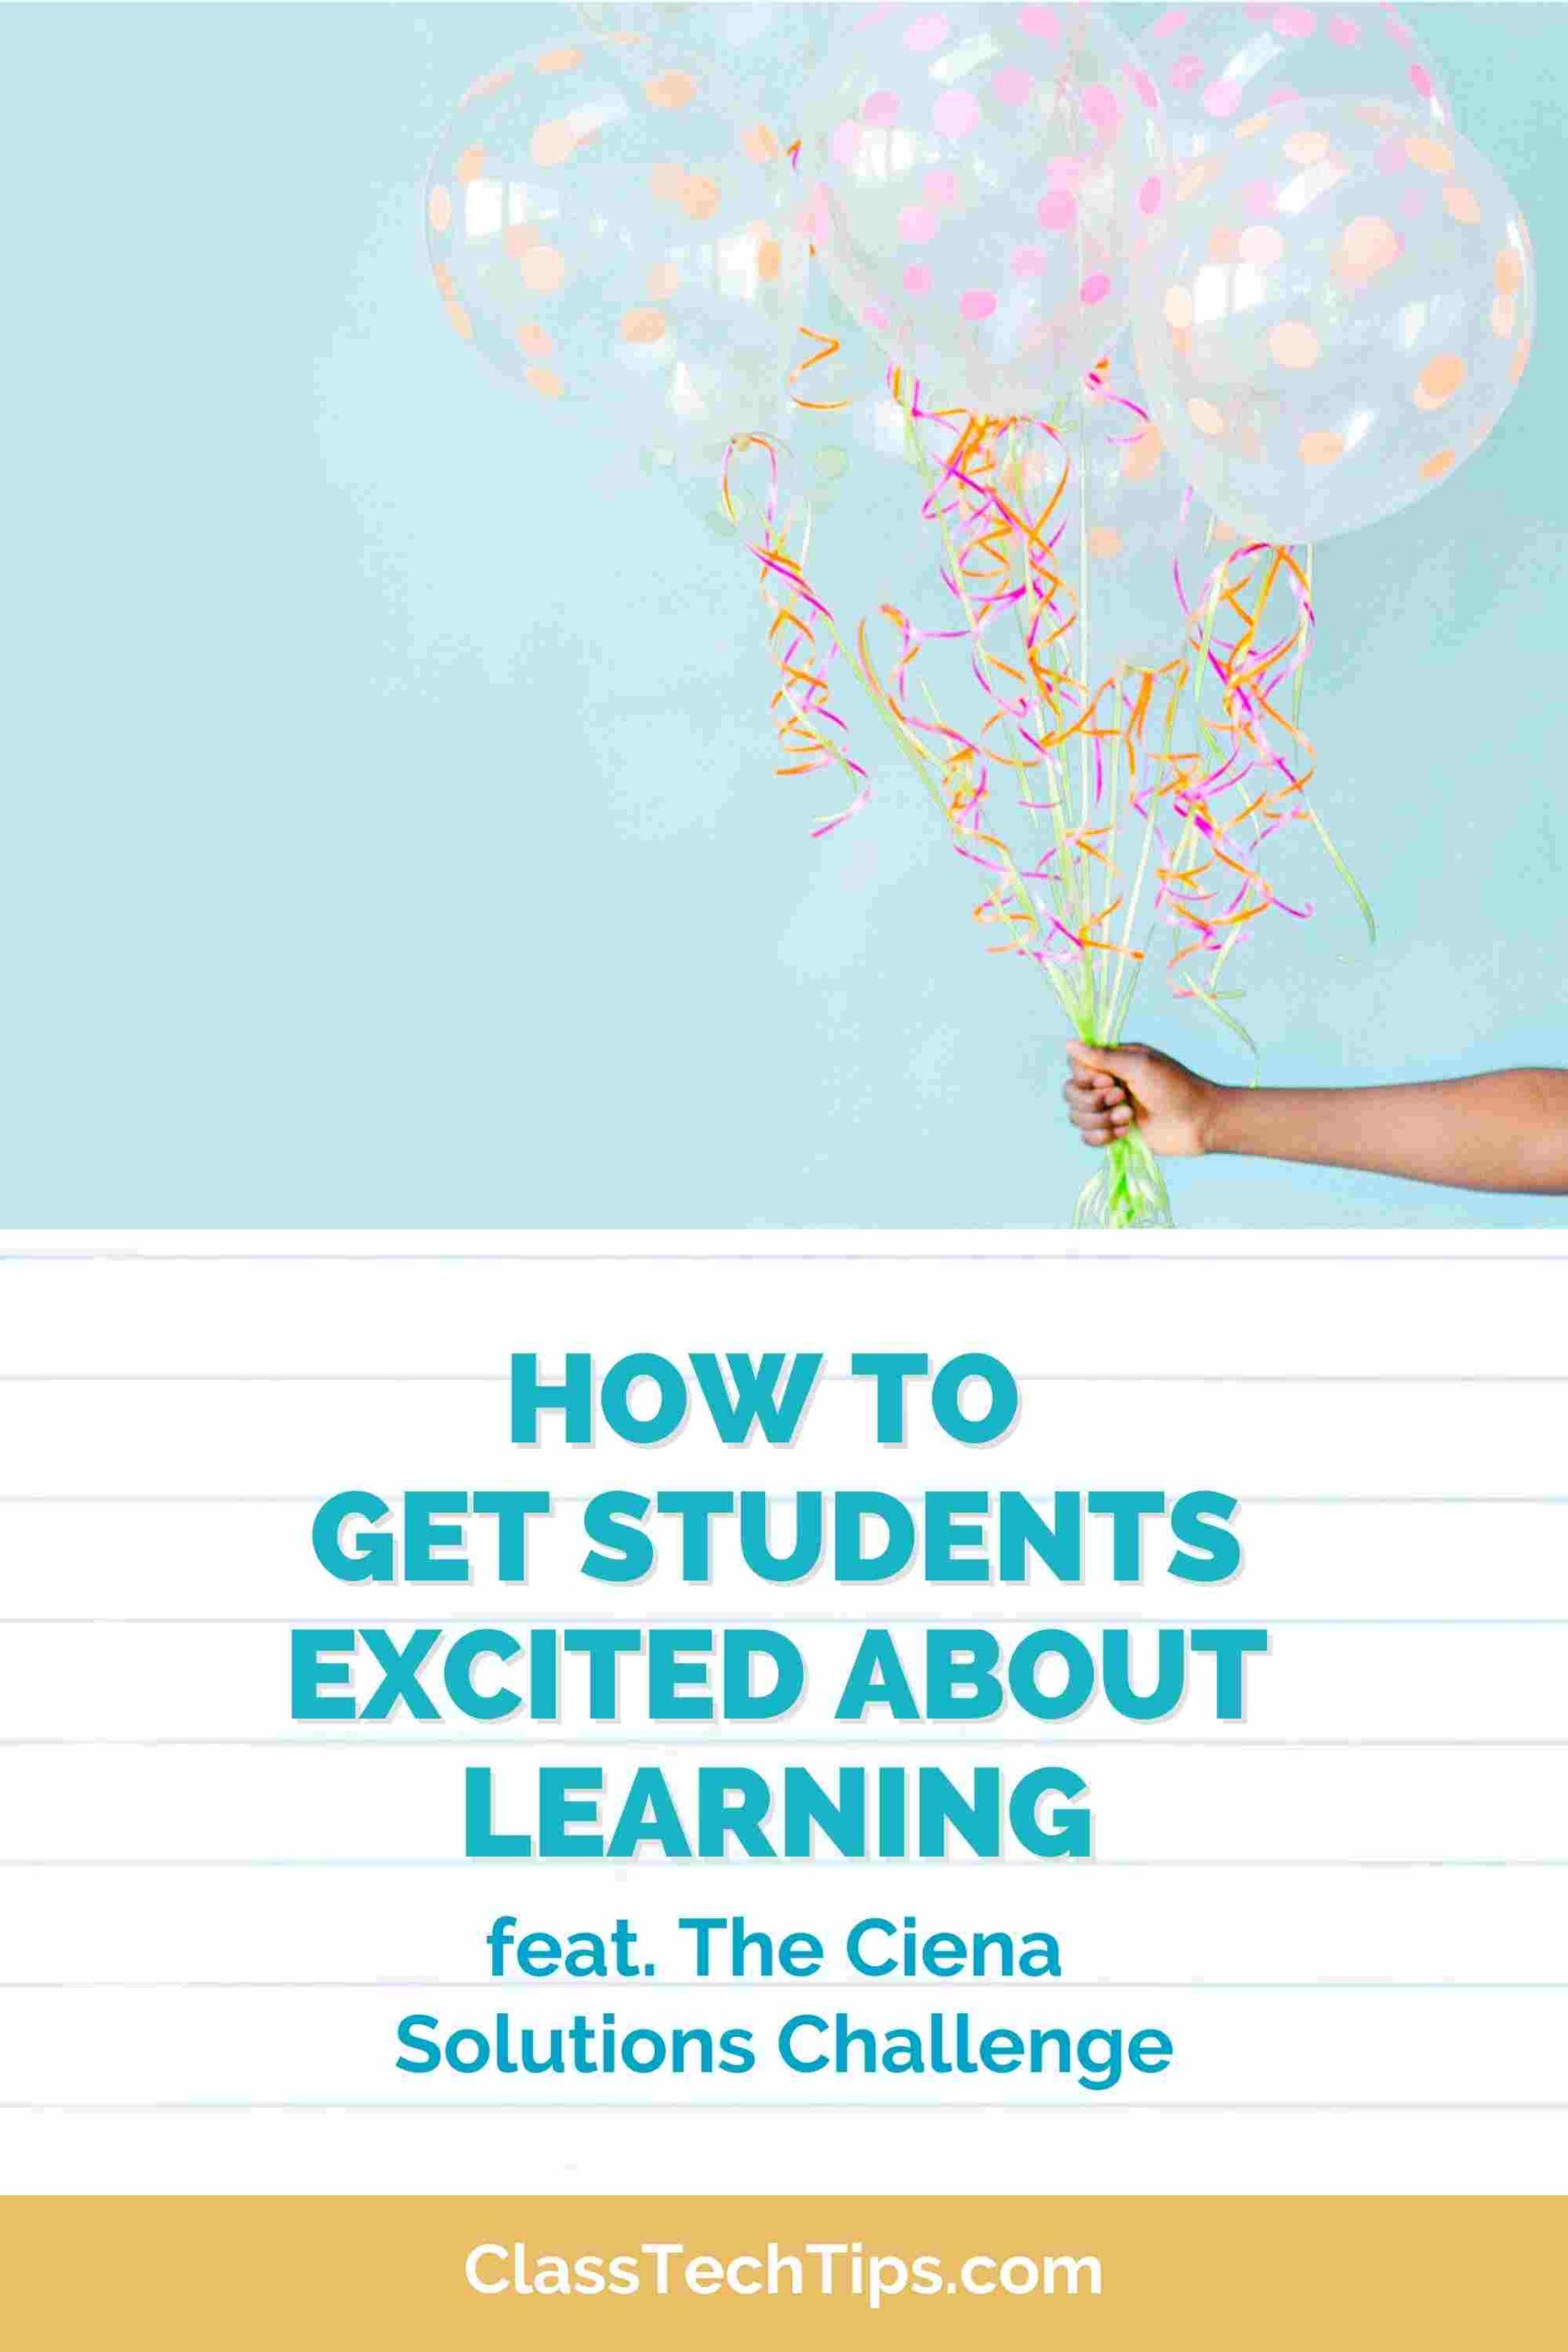 Get Students Excited About Learning